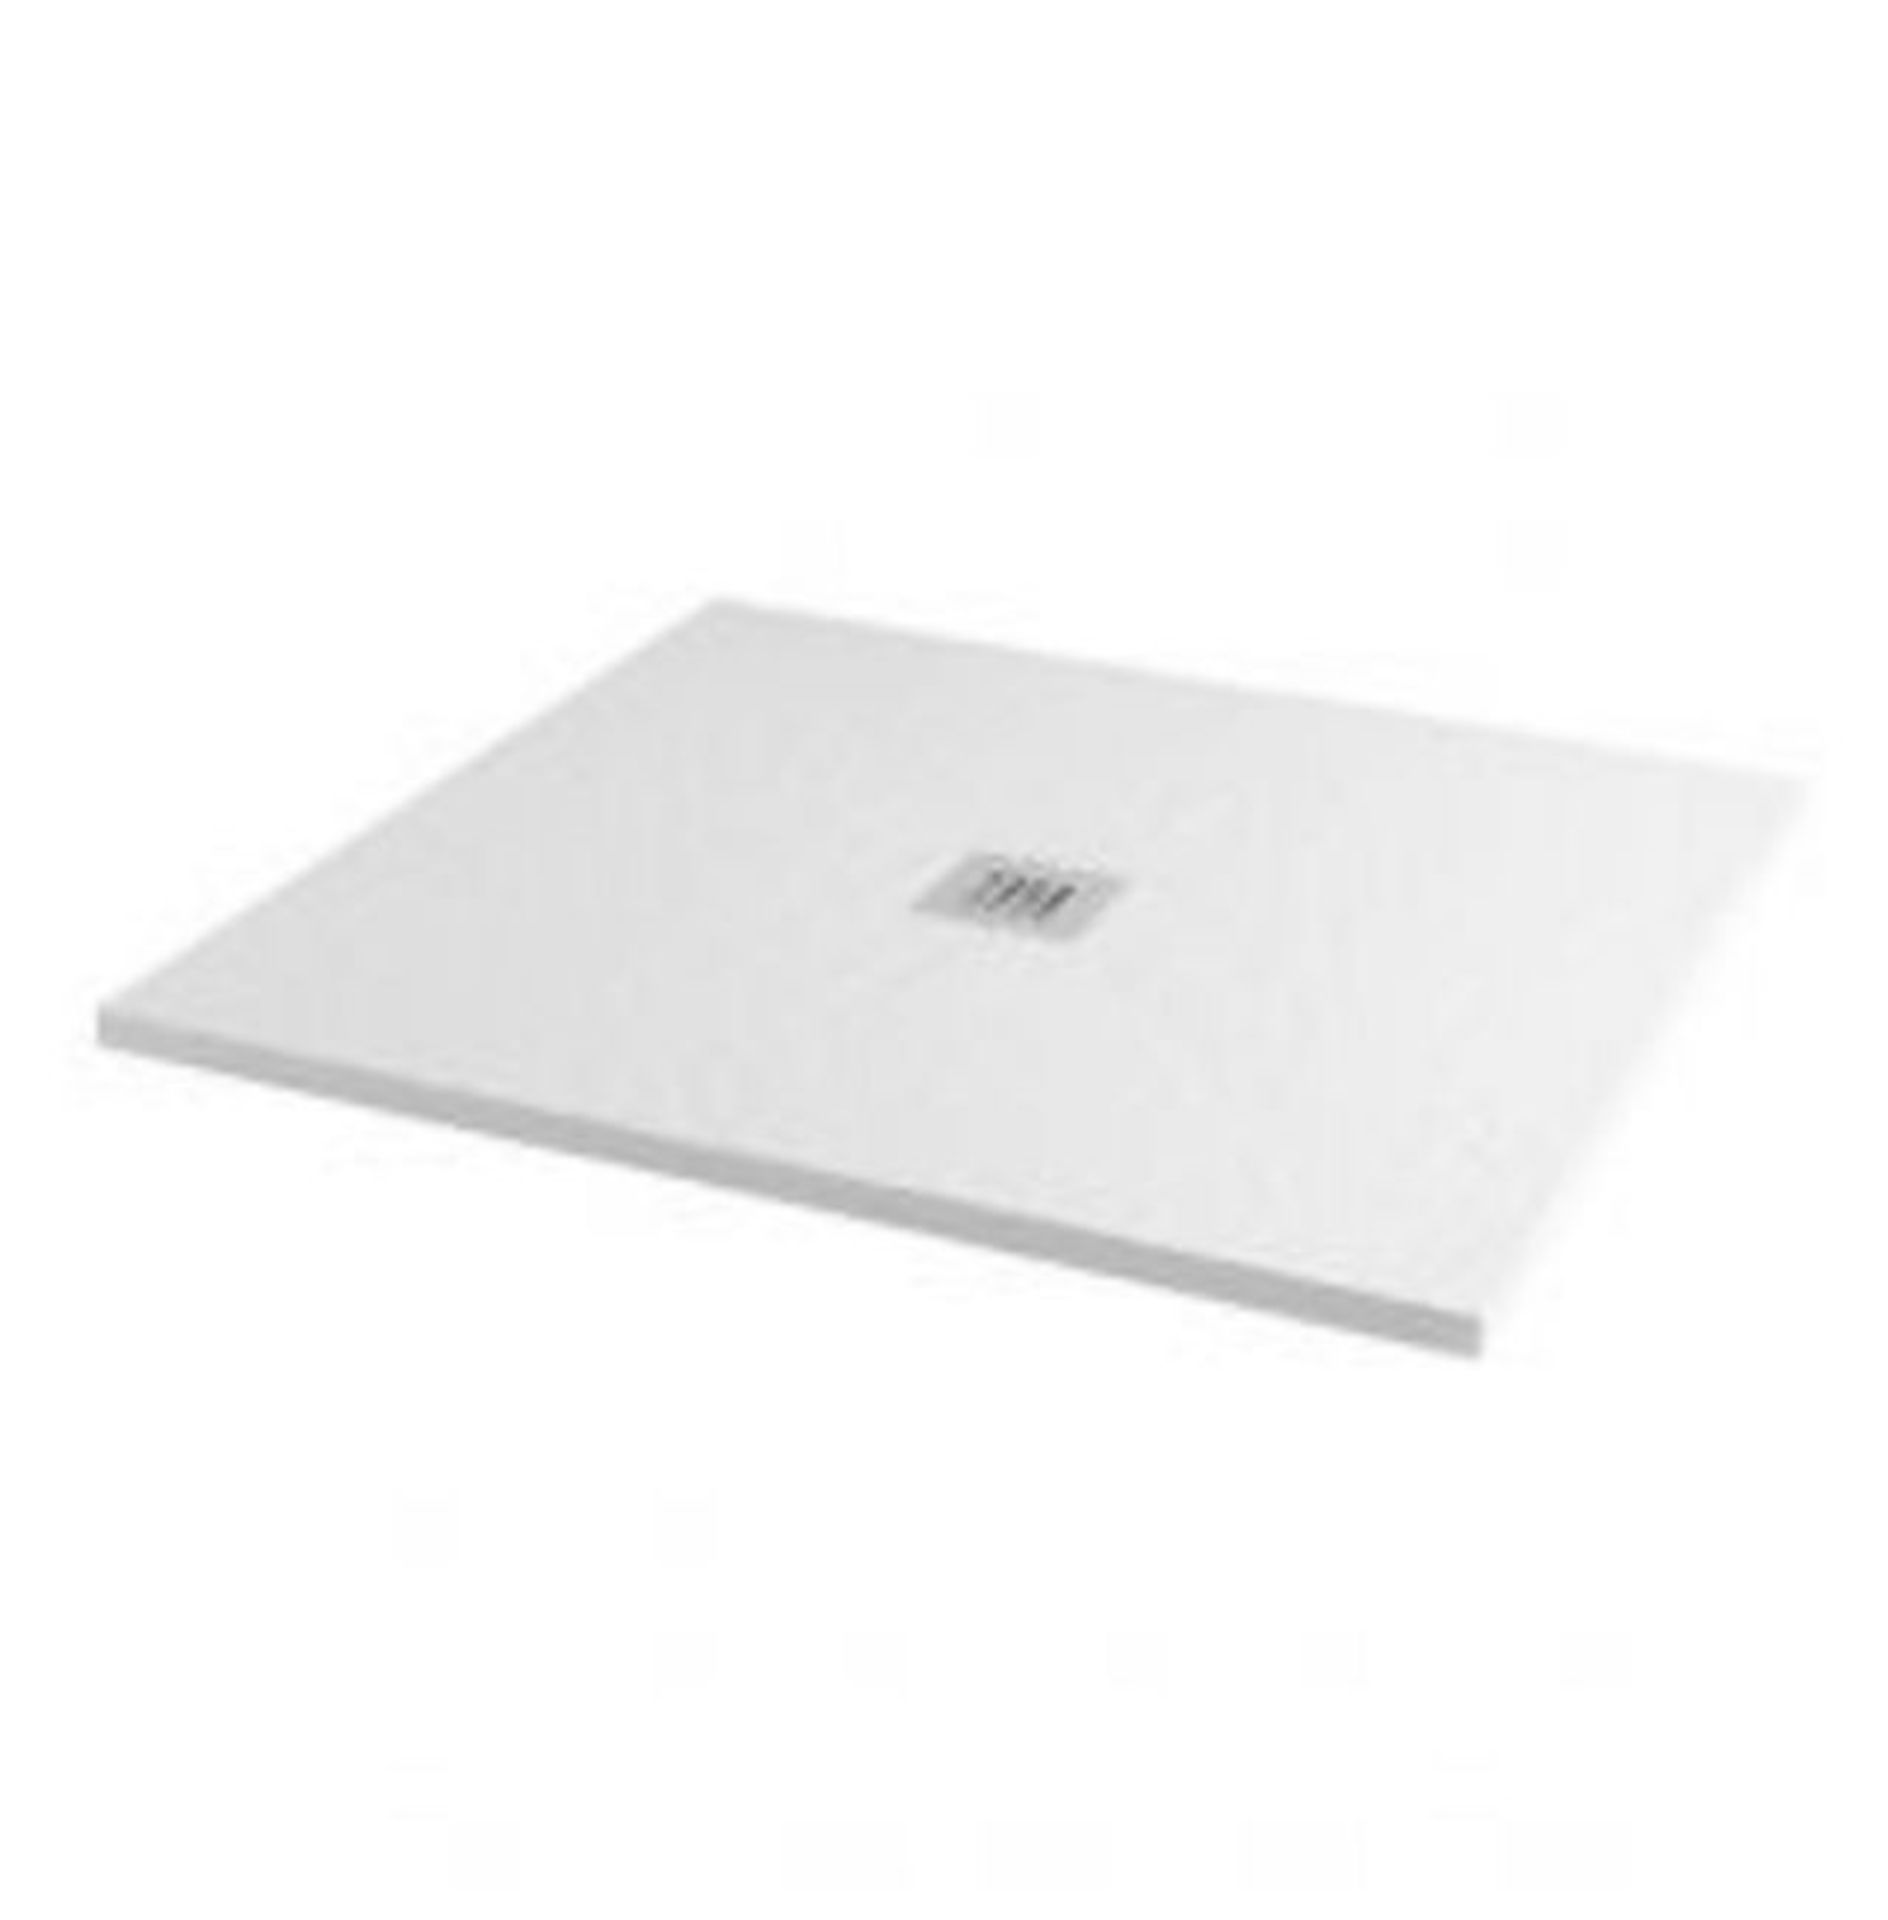 New 900x900mm Square White Slate Effect Shower Tray. Handcrafted From High-Grade Stone Resin,... - Image 2 of 2